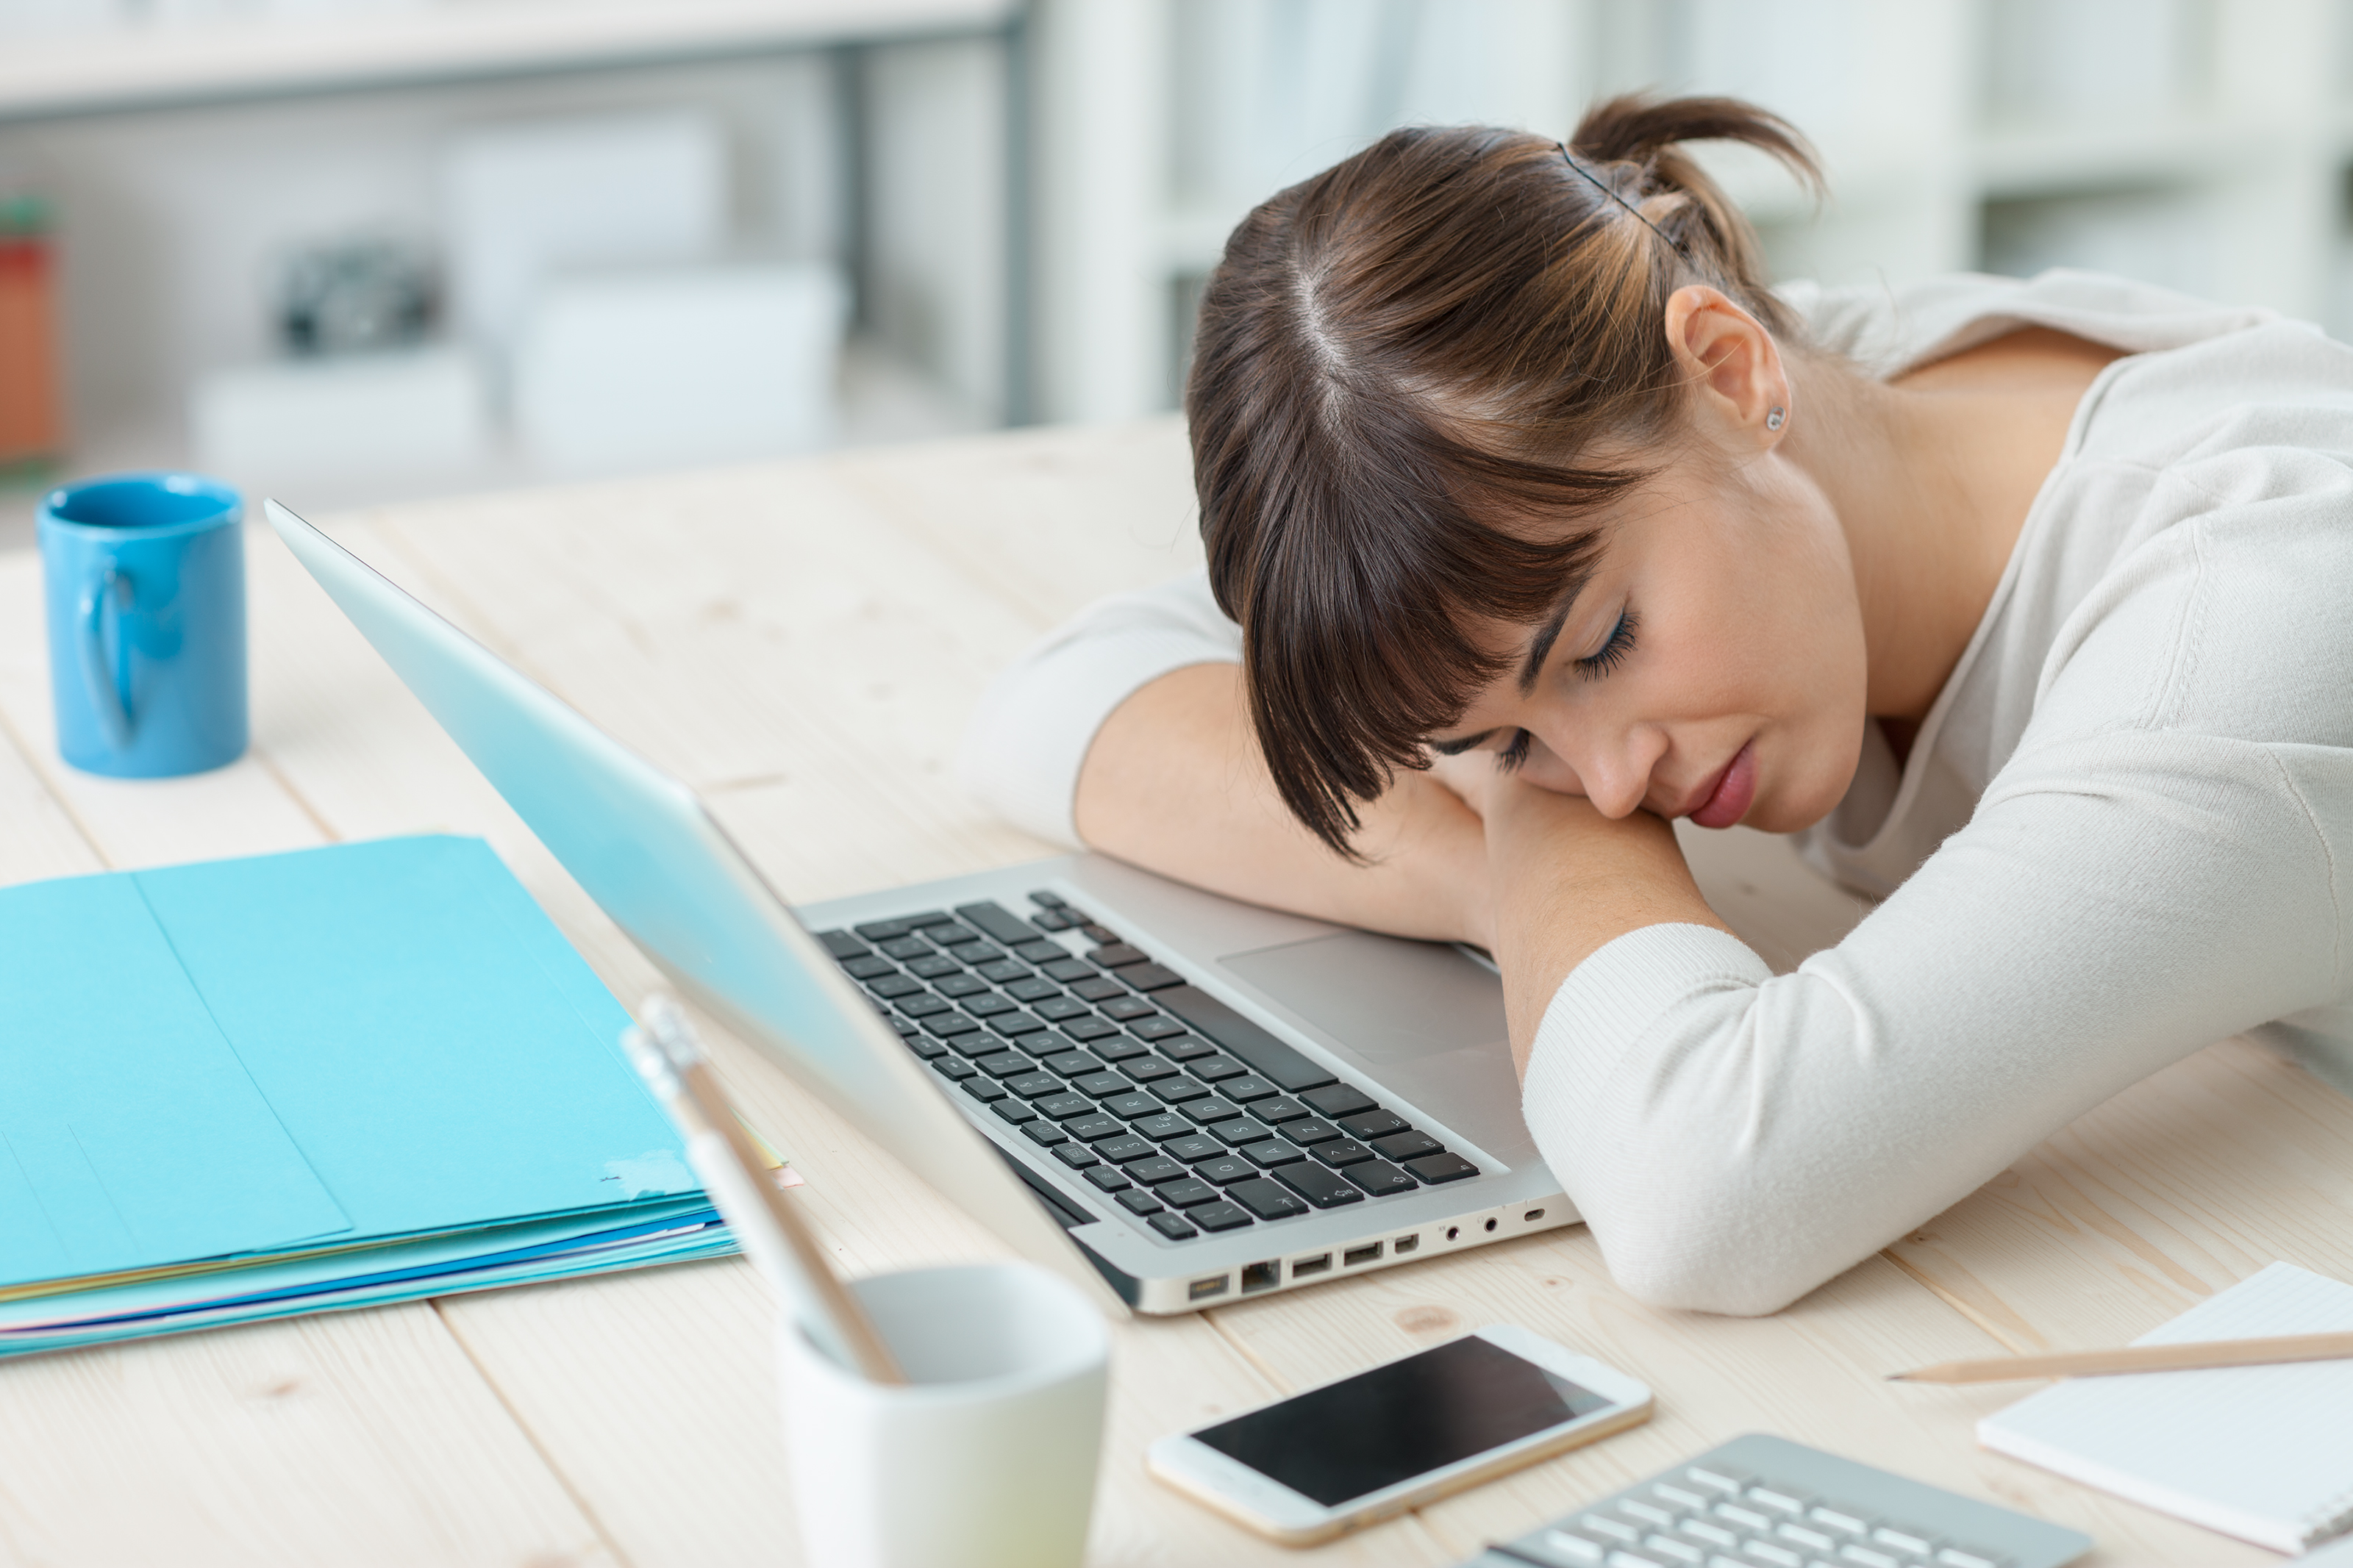 STUDY FINDS MOST COMMON CAUSES OF STRESS IN UK WORKFORCE